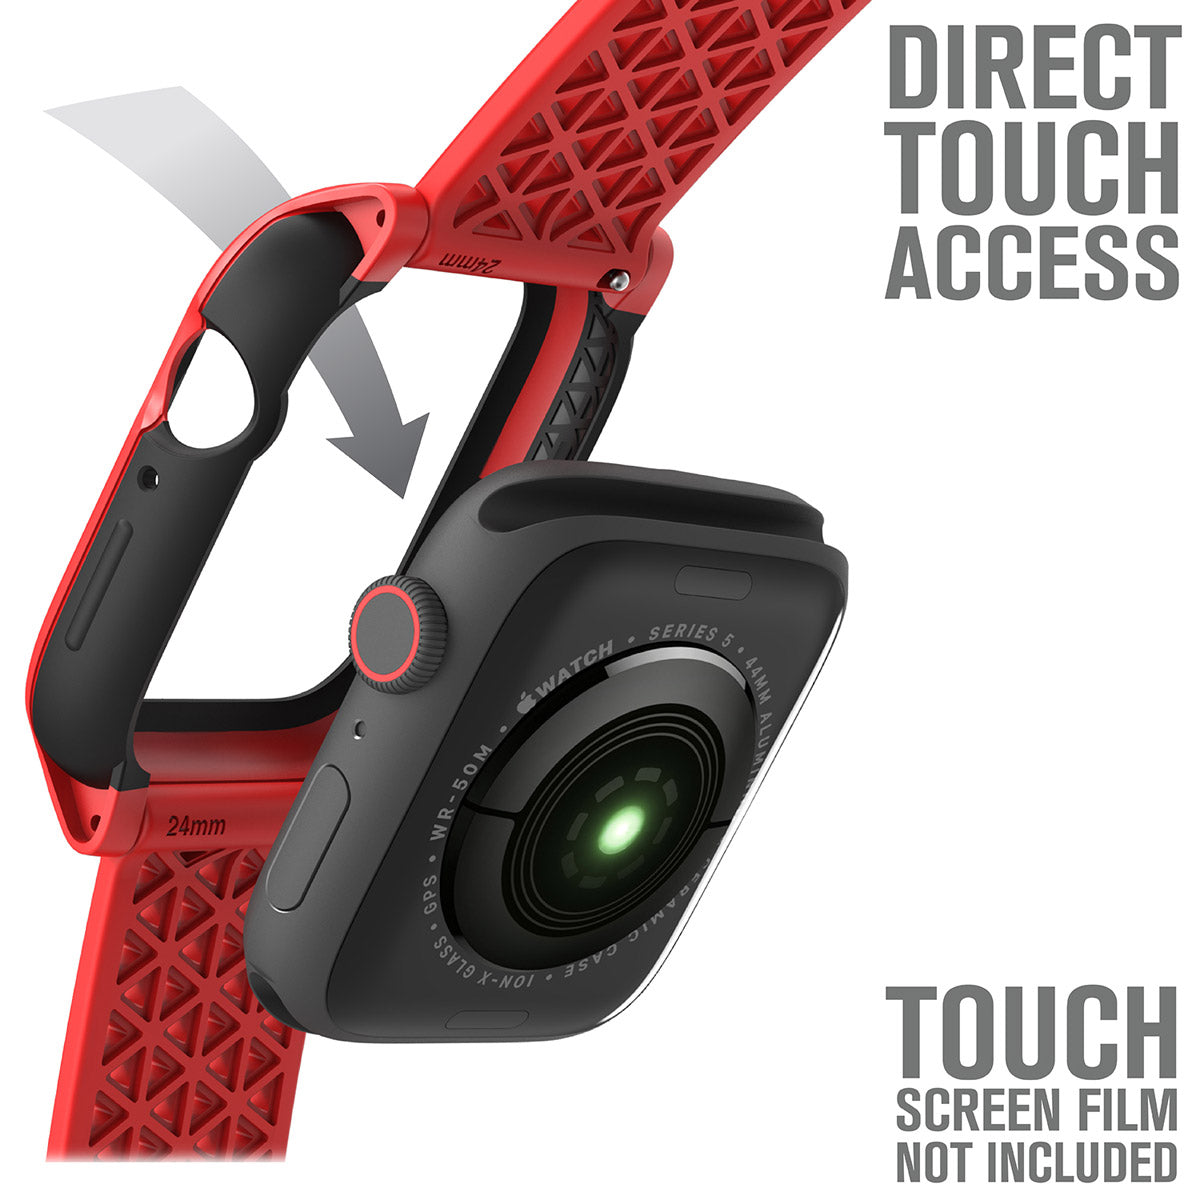 catalyst apple watch series 6 5 4 se gen 21 44mm 40mm impact protection case sport band flame red showing the back part of the apple watch and case with direct touch access text reads direct touch access touch screen film not included